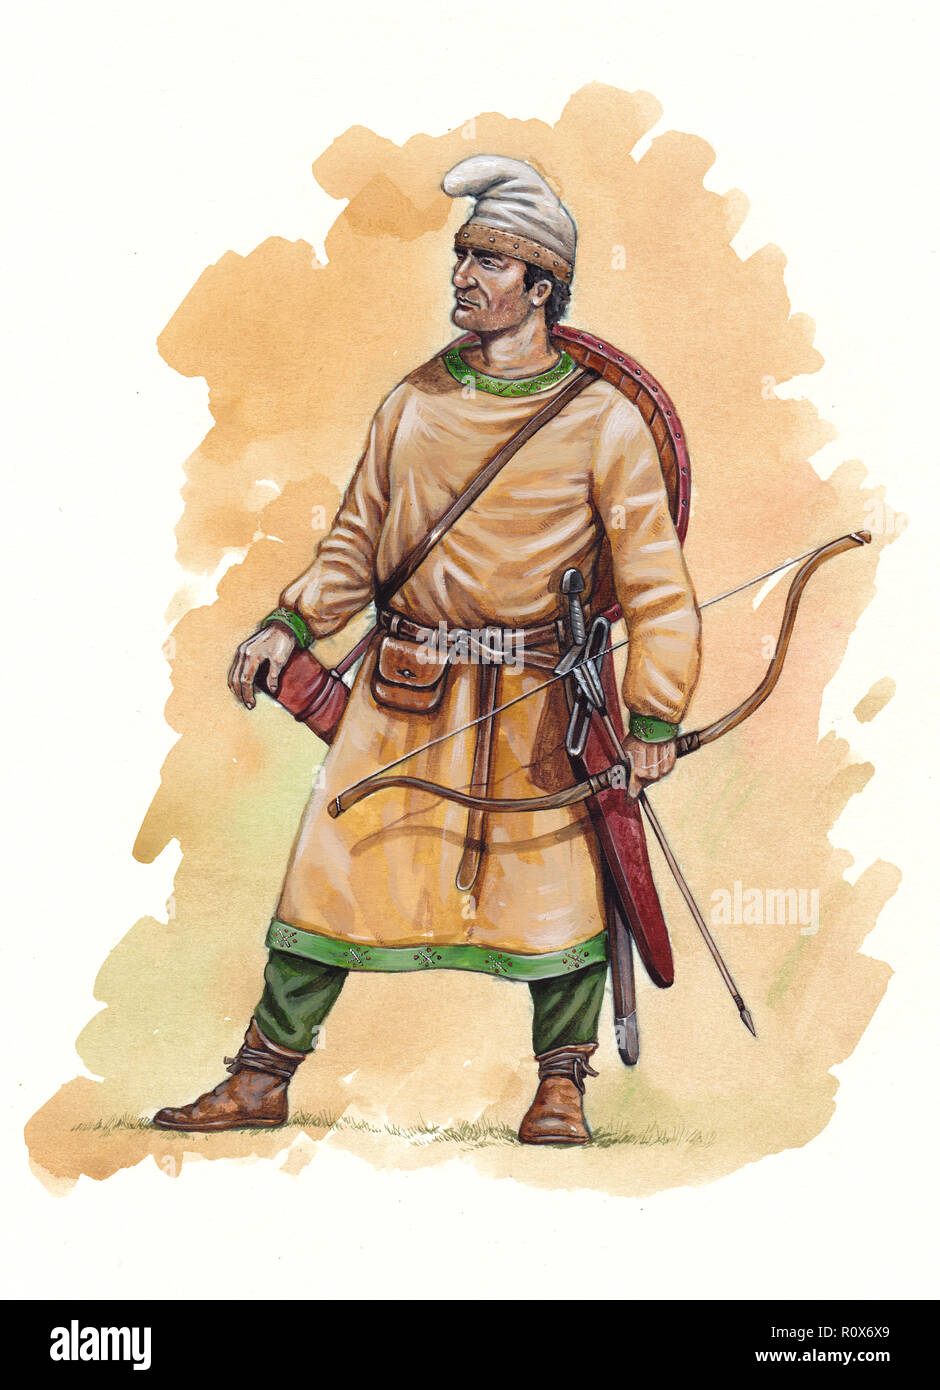 Medieval german archer illustration. Knight with the bow drawing. Stock Photo